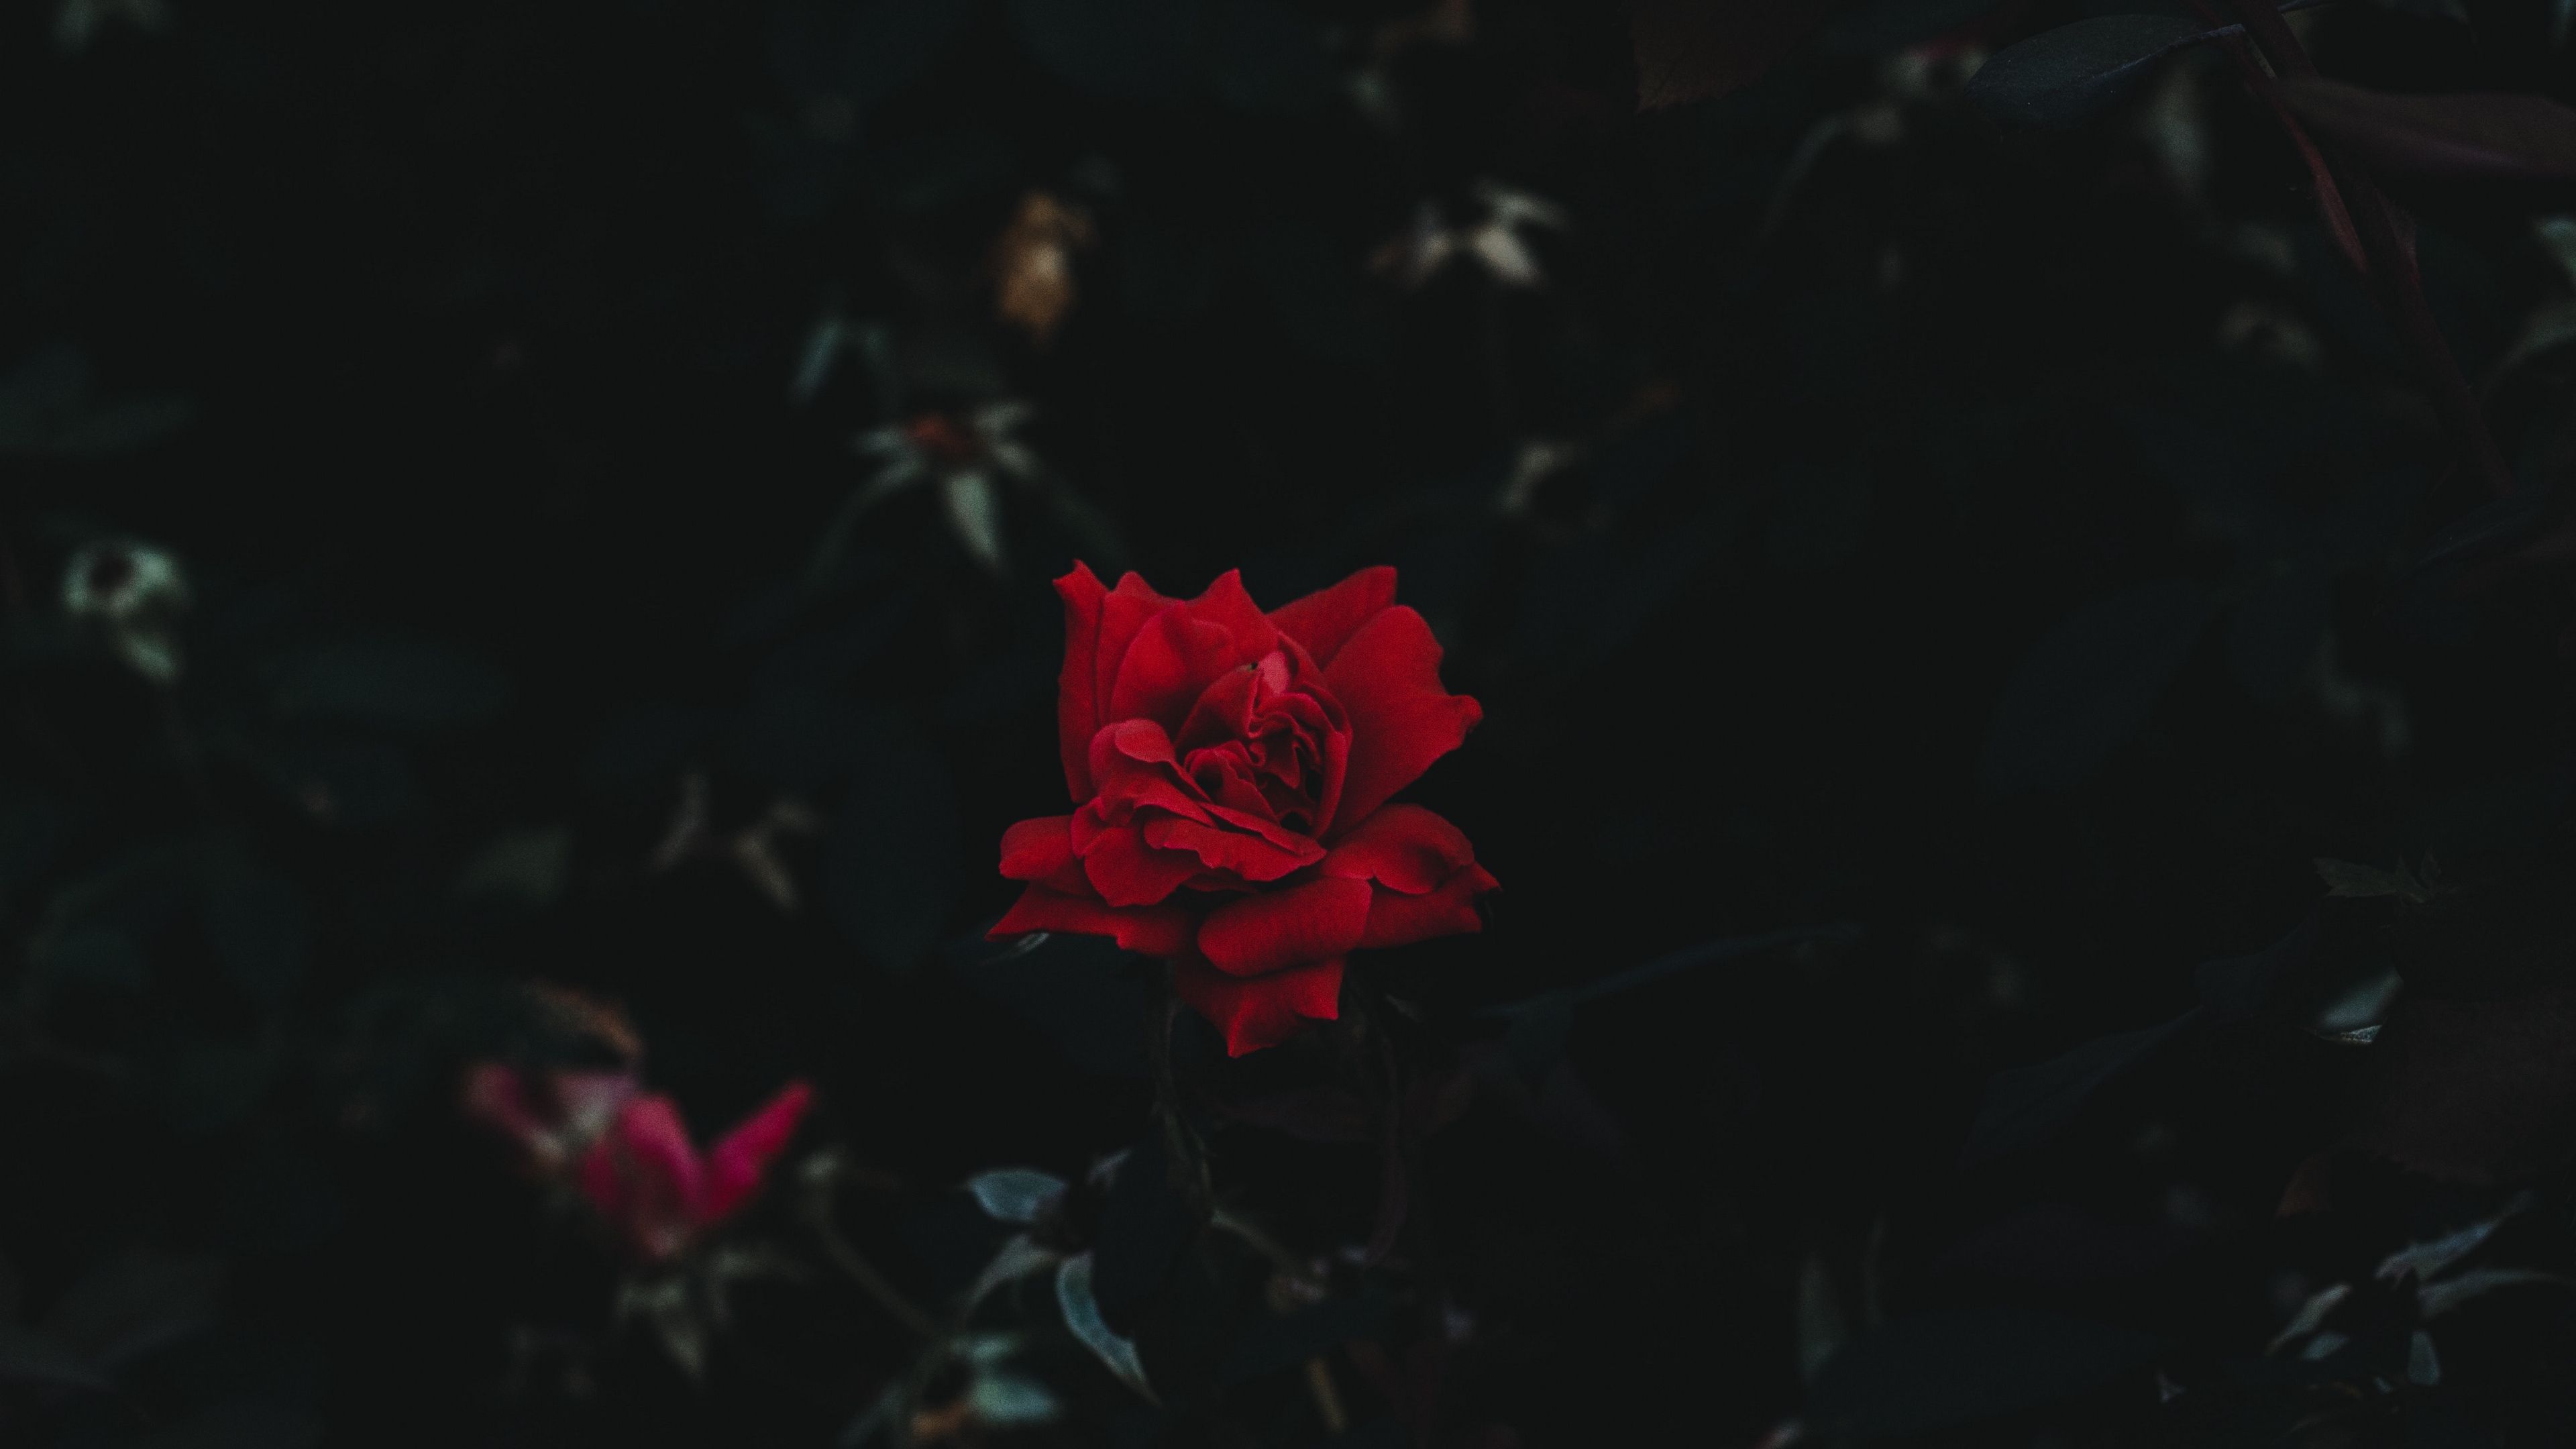 A red rose surrounded by green leaves. - Black rose